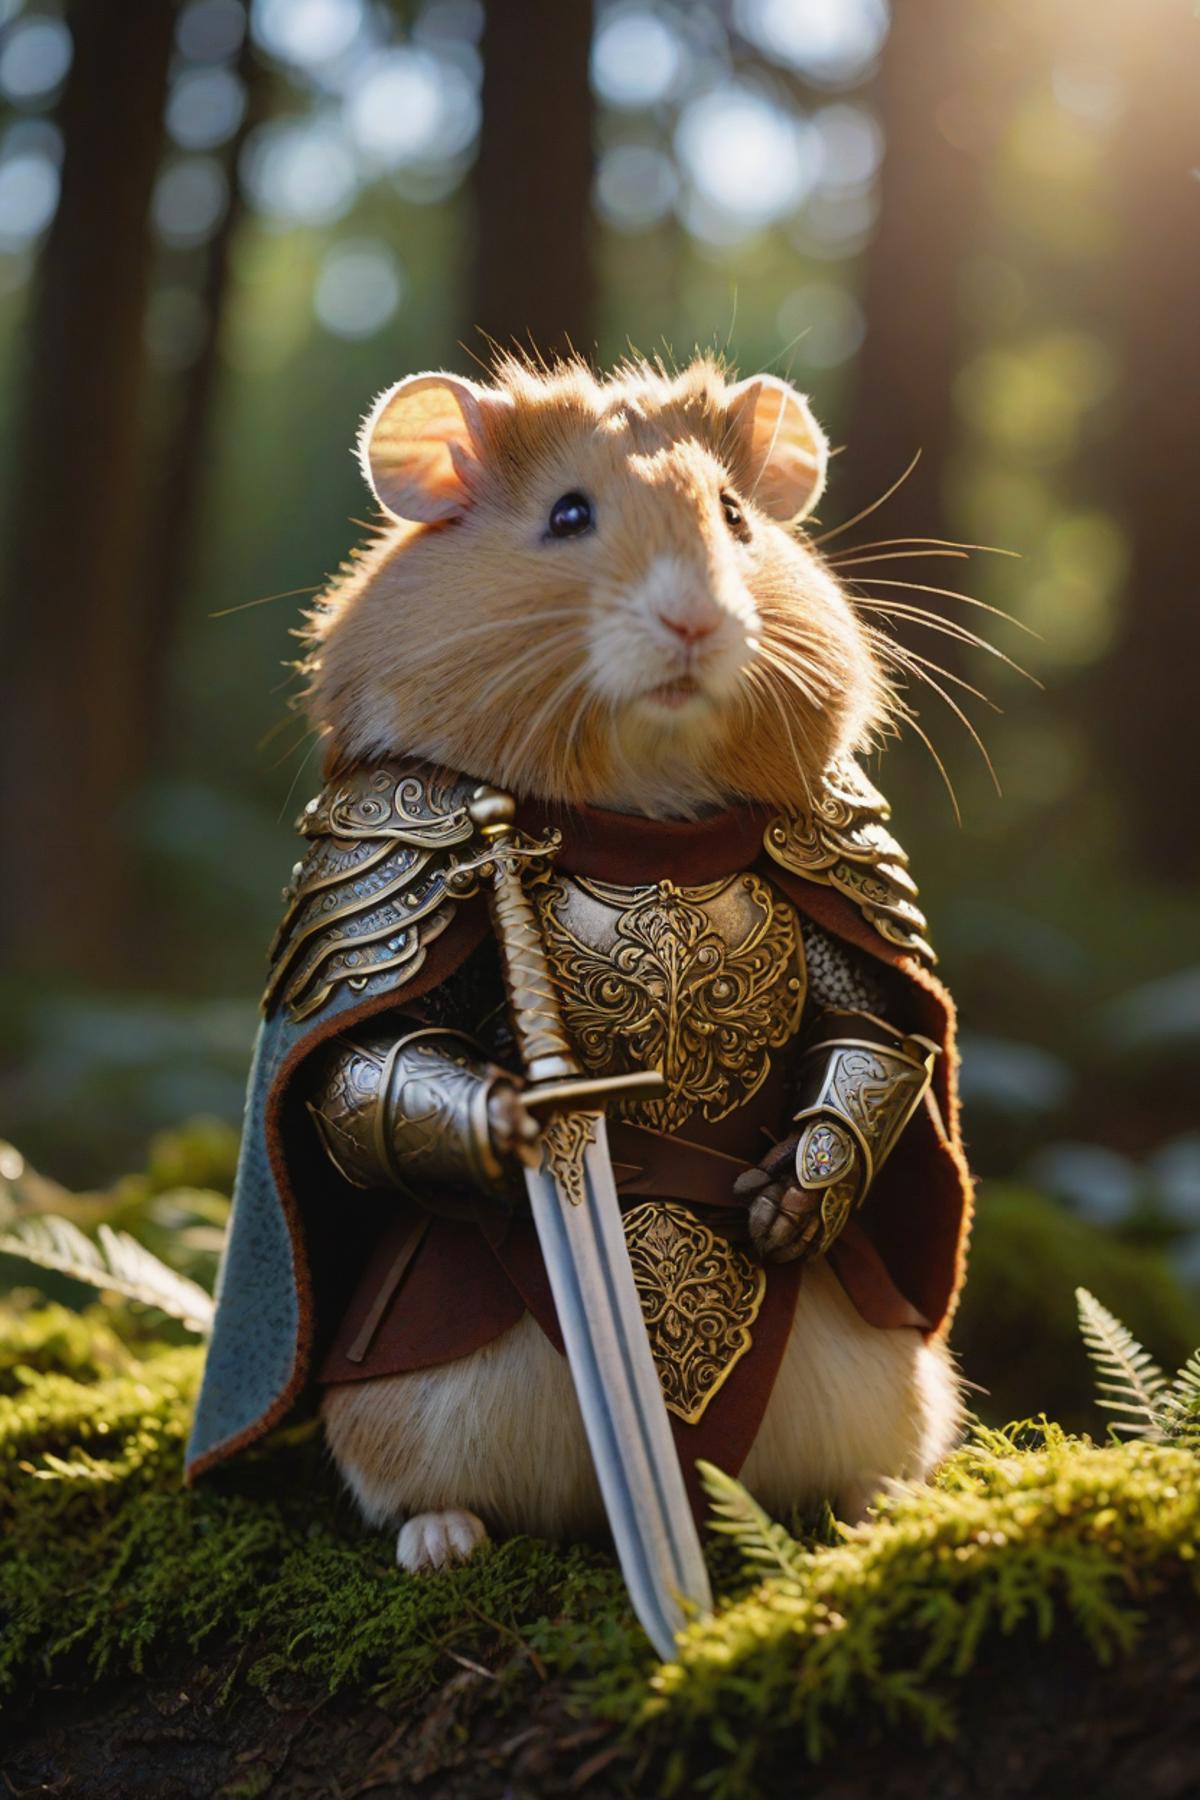 A hamster wearing a knight's armor and holding a sword.